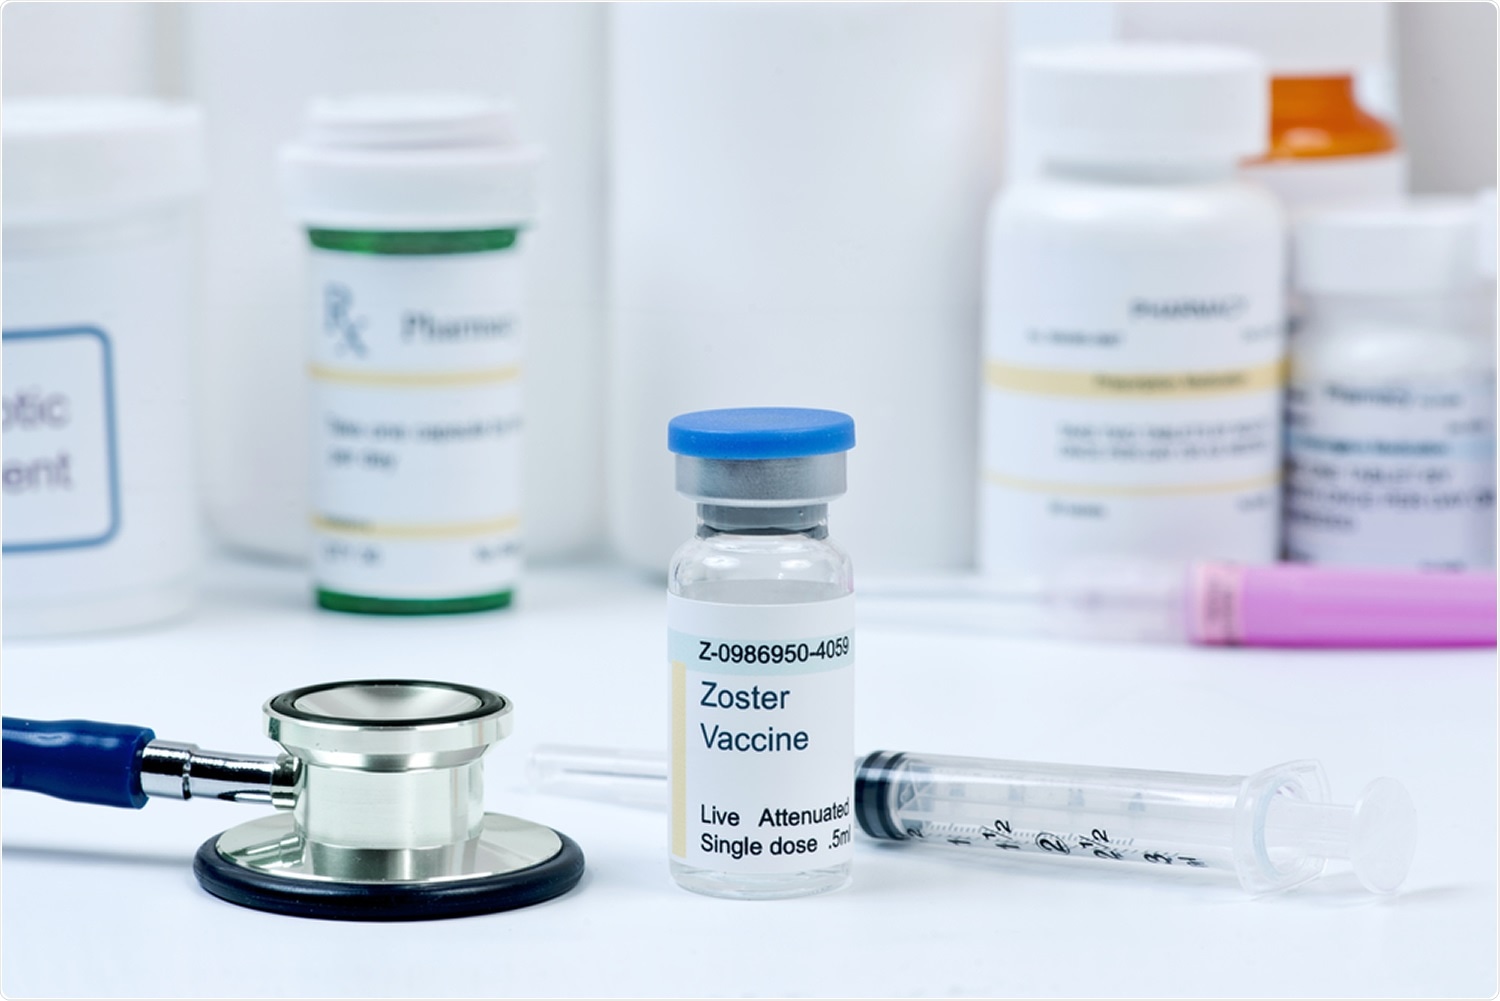 Study: Recombinant adjuvanted zoster vaccine and reduced risk of COVID-19 diagnosis and hospitalization in older adults. Image Credit: MedstockPhotos / Shutterstock